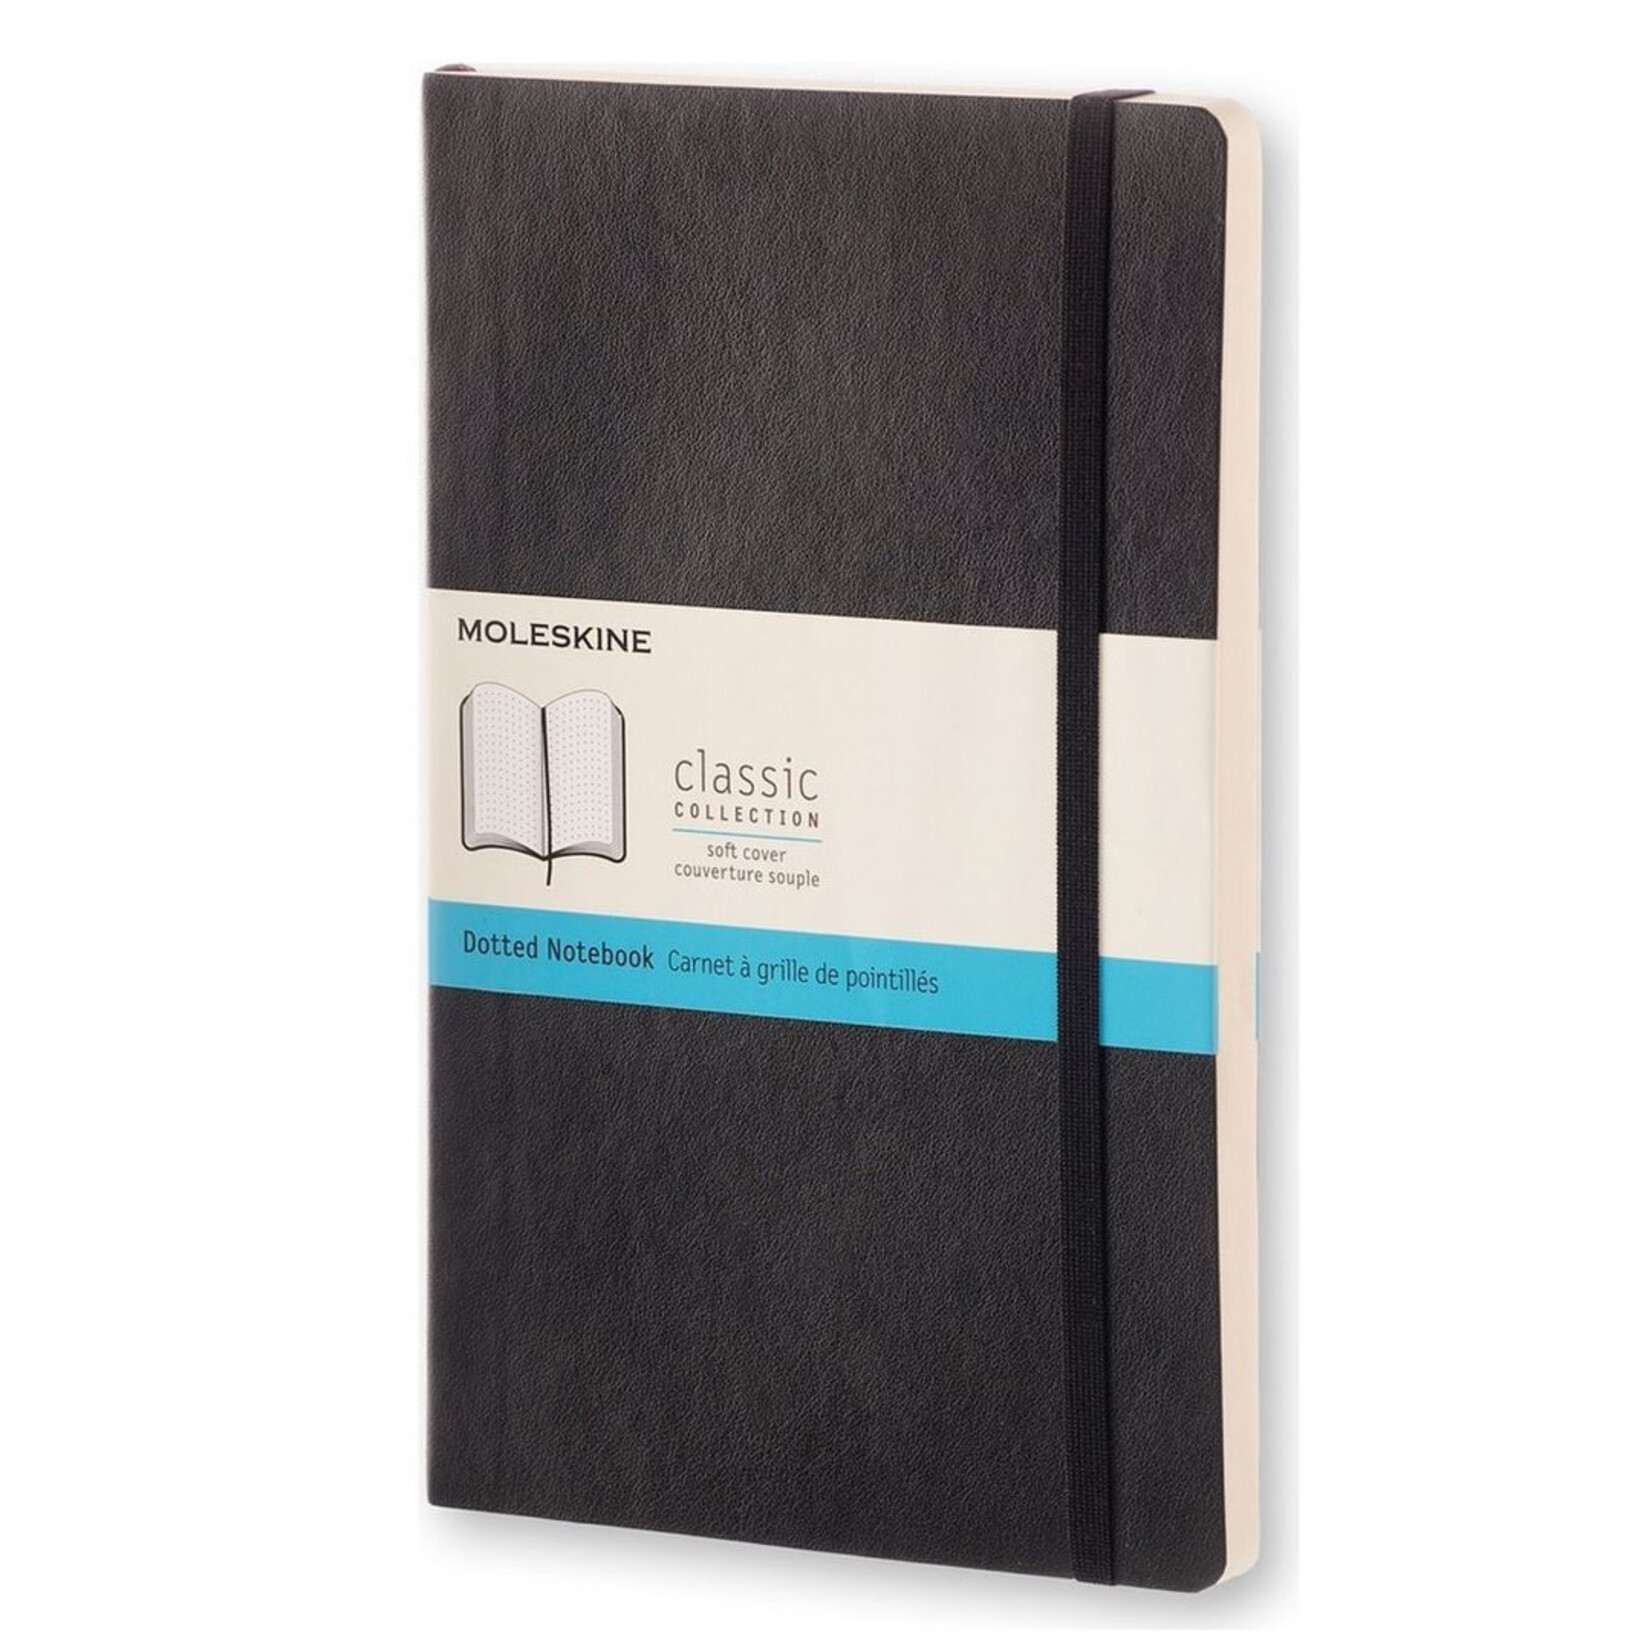 Moleskine Classic Notebook Large Dotted, Soft Cover Black